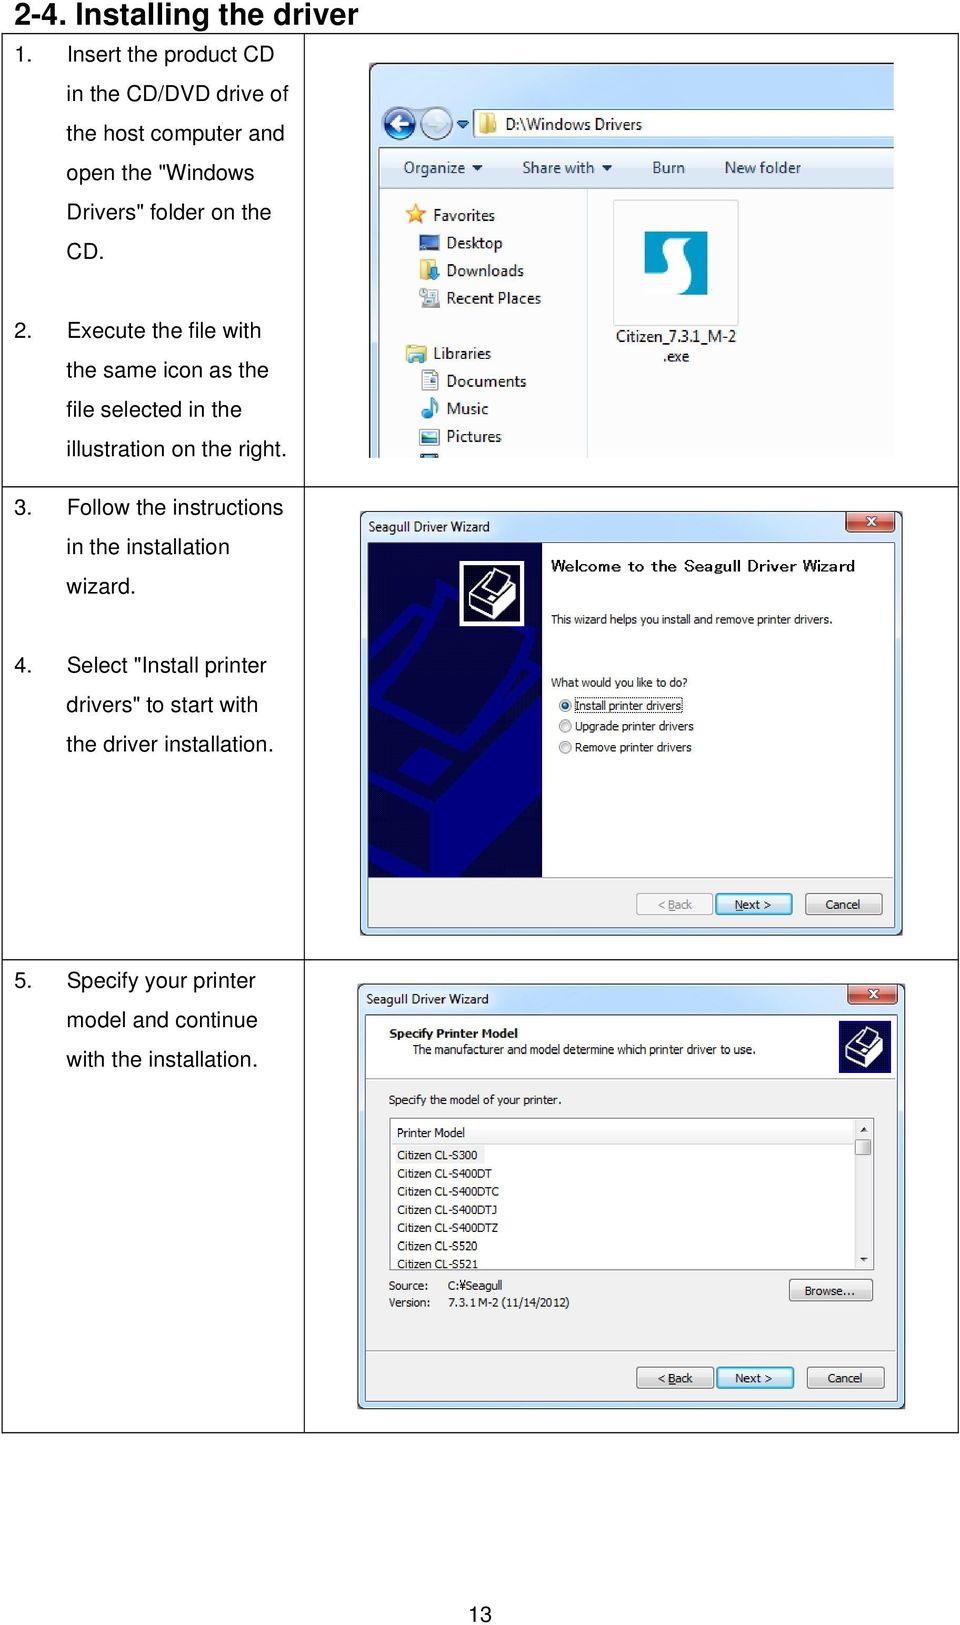 CD. 2. Execute the file with the same icon as the file selected in the illustration on the right. 3.